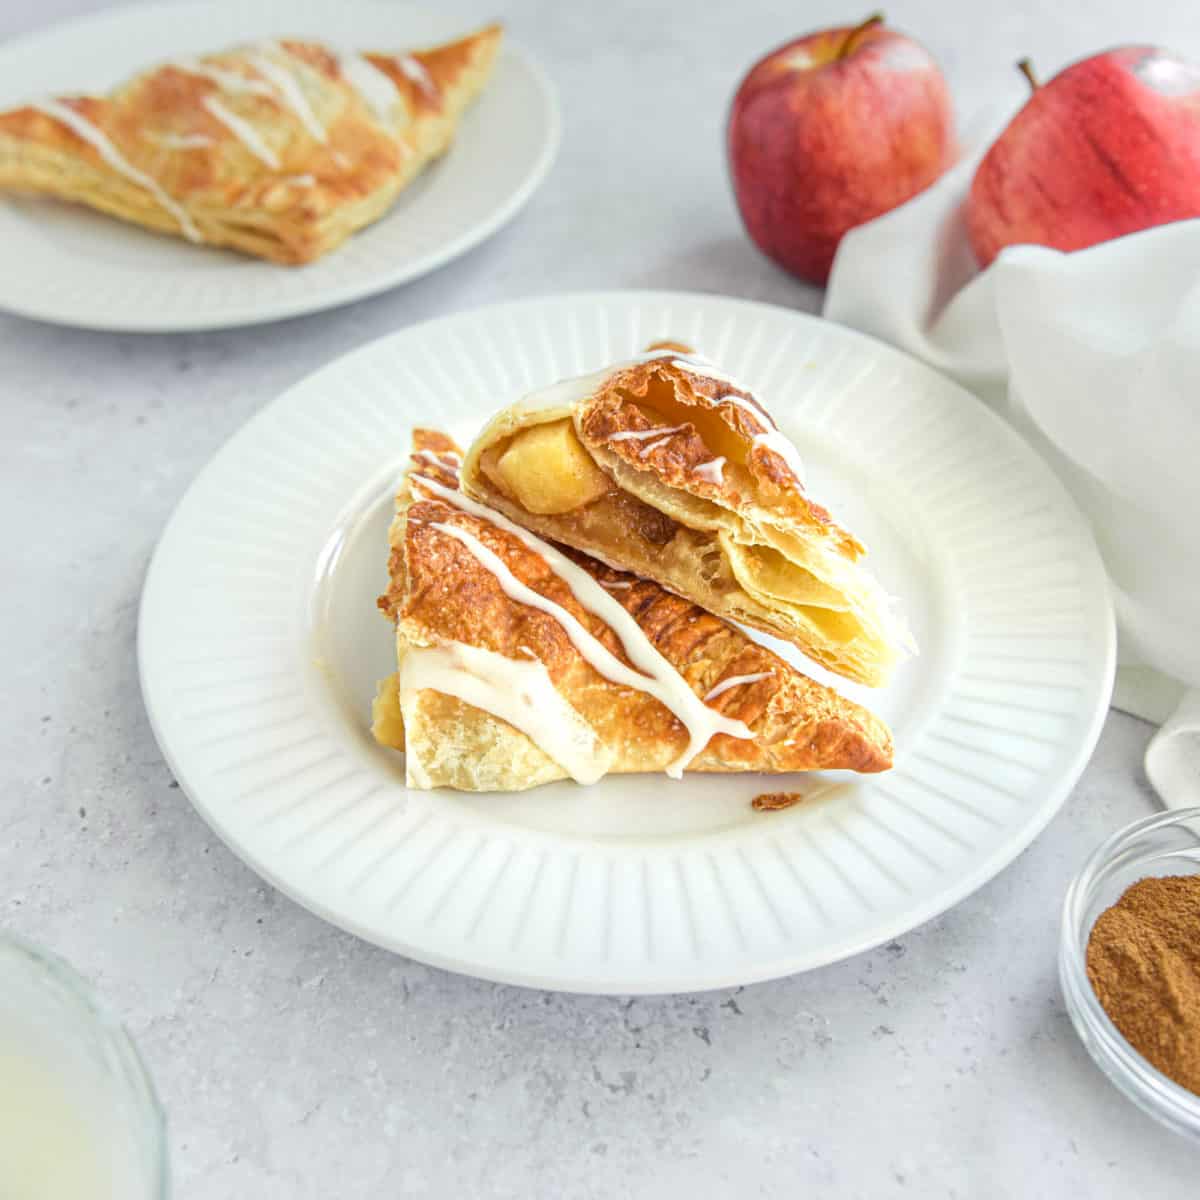 Apple turnovers with fresh apples in the background.